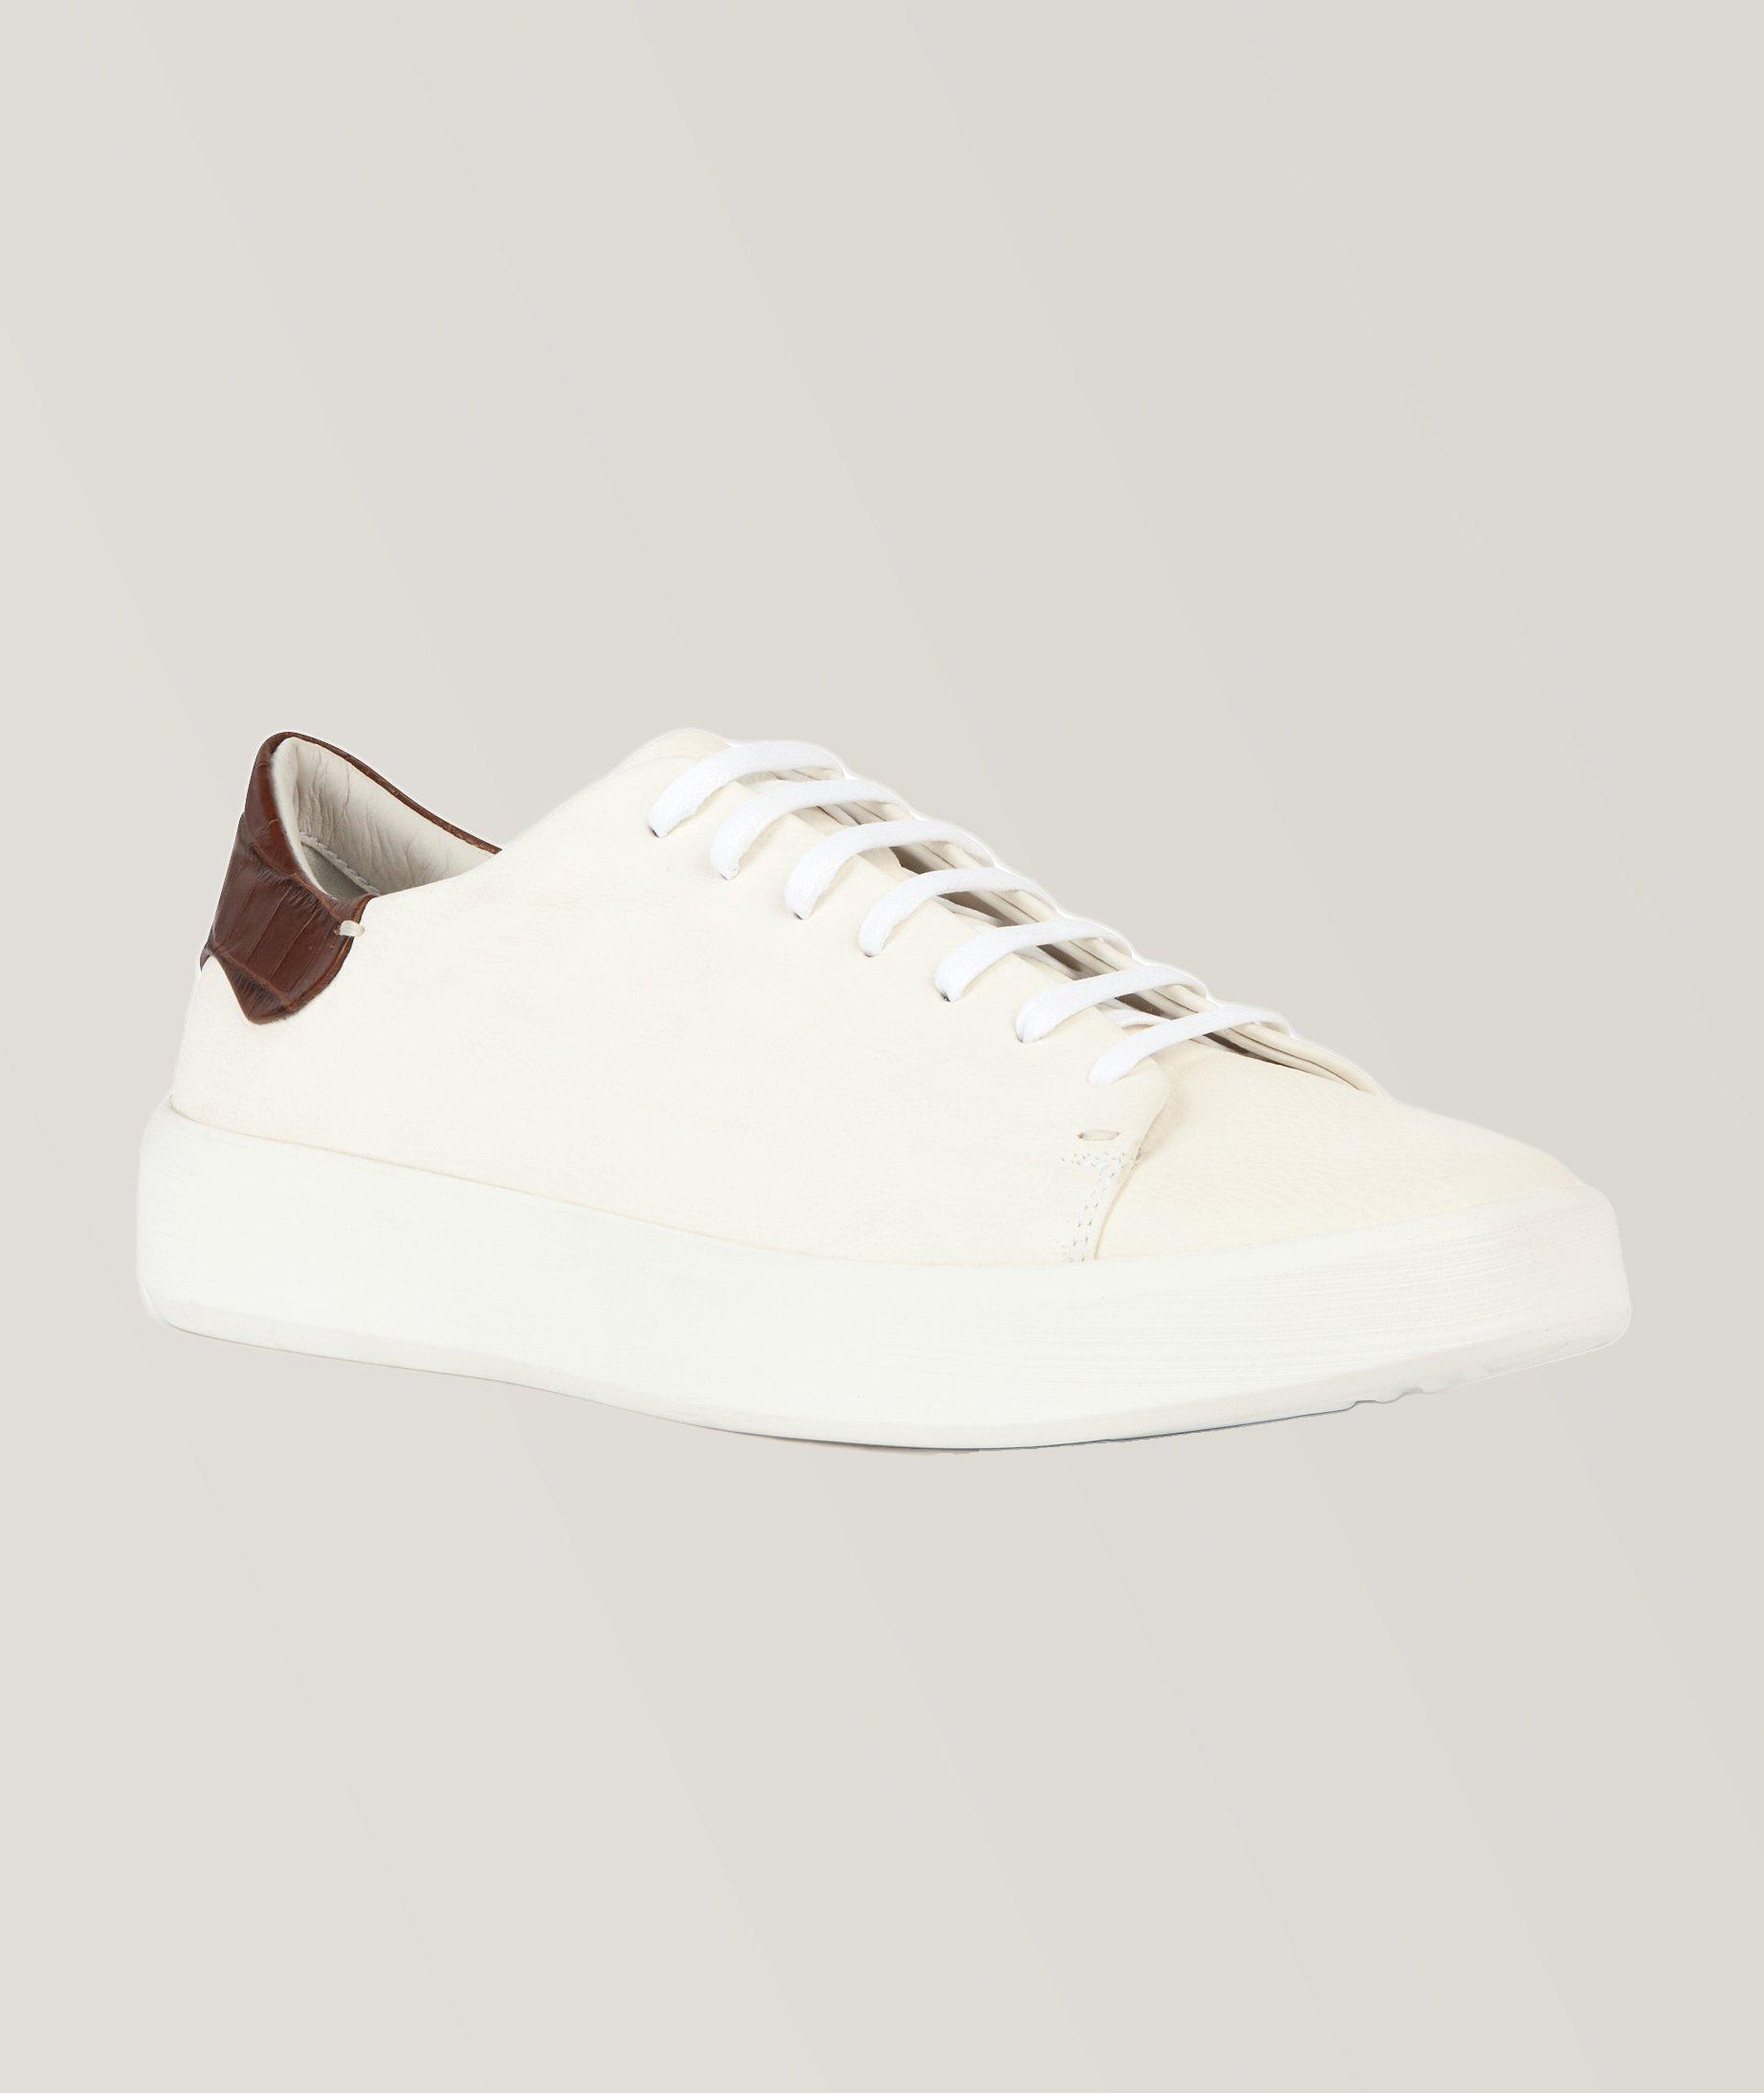 Velletri Mixed Materials Sneakers image 0